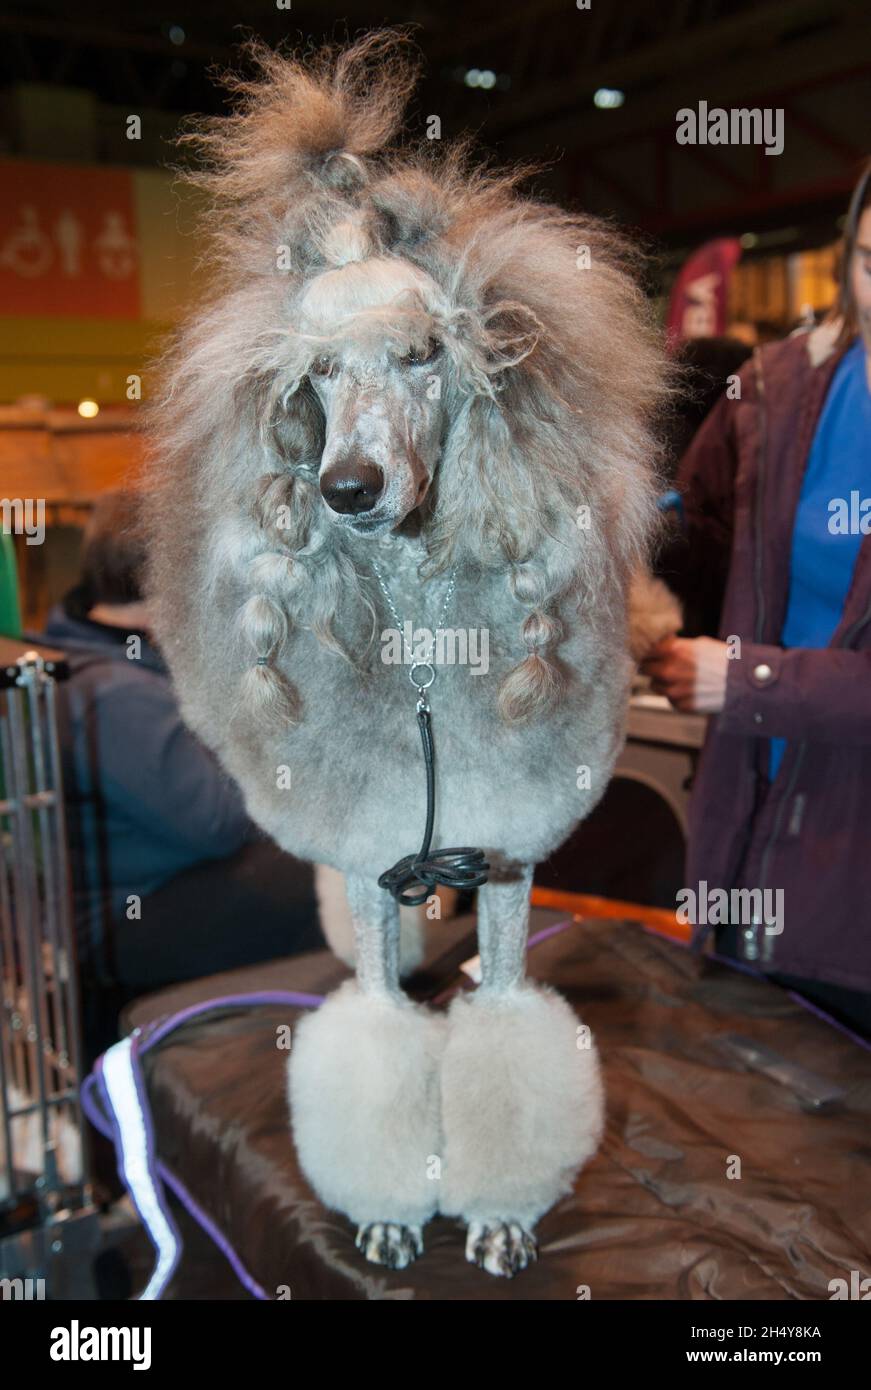 Second day of Crufts 2017 dog show at the NEC in Birmingham, UK. Picture date: Friday 10 March, 2017. Photo credit: Katja Ogrin/ EMPICS Entertainment. Stock Photo